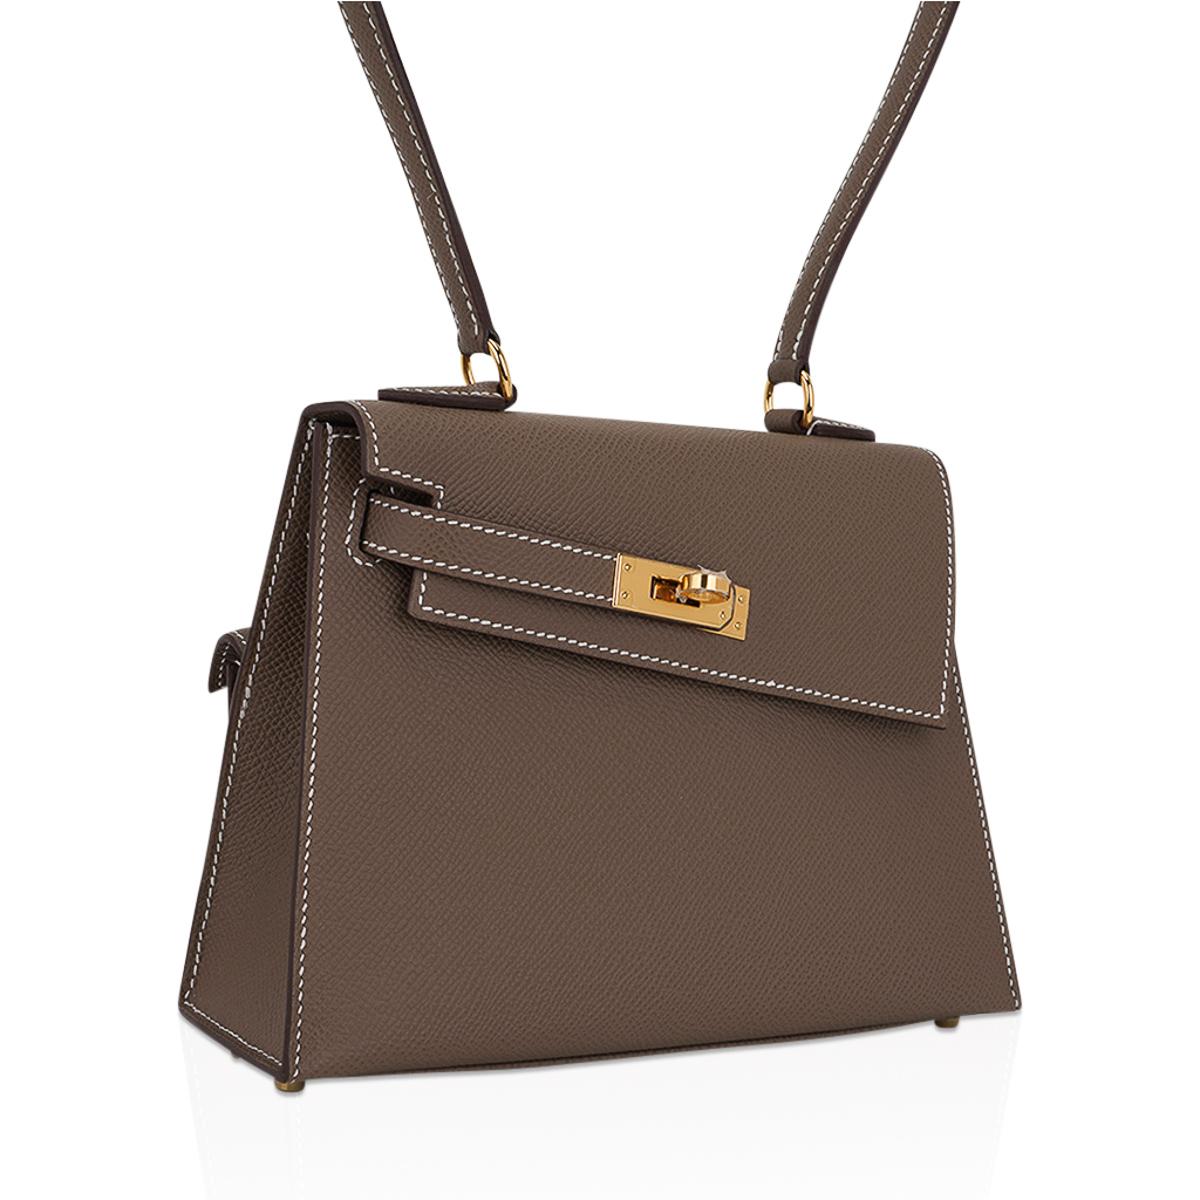 Mightychic offers a very Limited Edition Hermes Kelly 20 Sellier En Desordre featured in Etoupe.
Part of the disorder series, this is a Kelly with a twist.
The front flap is attached at an angle with one sangle and touret.
The back has an outer